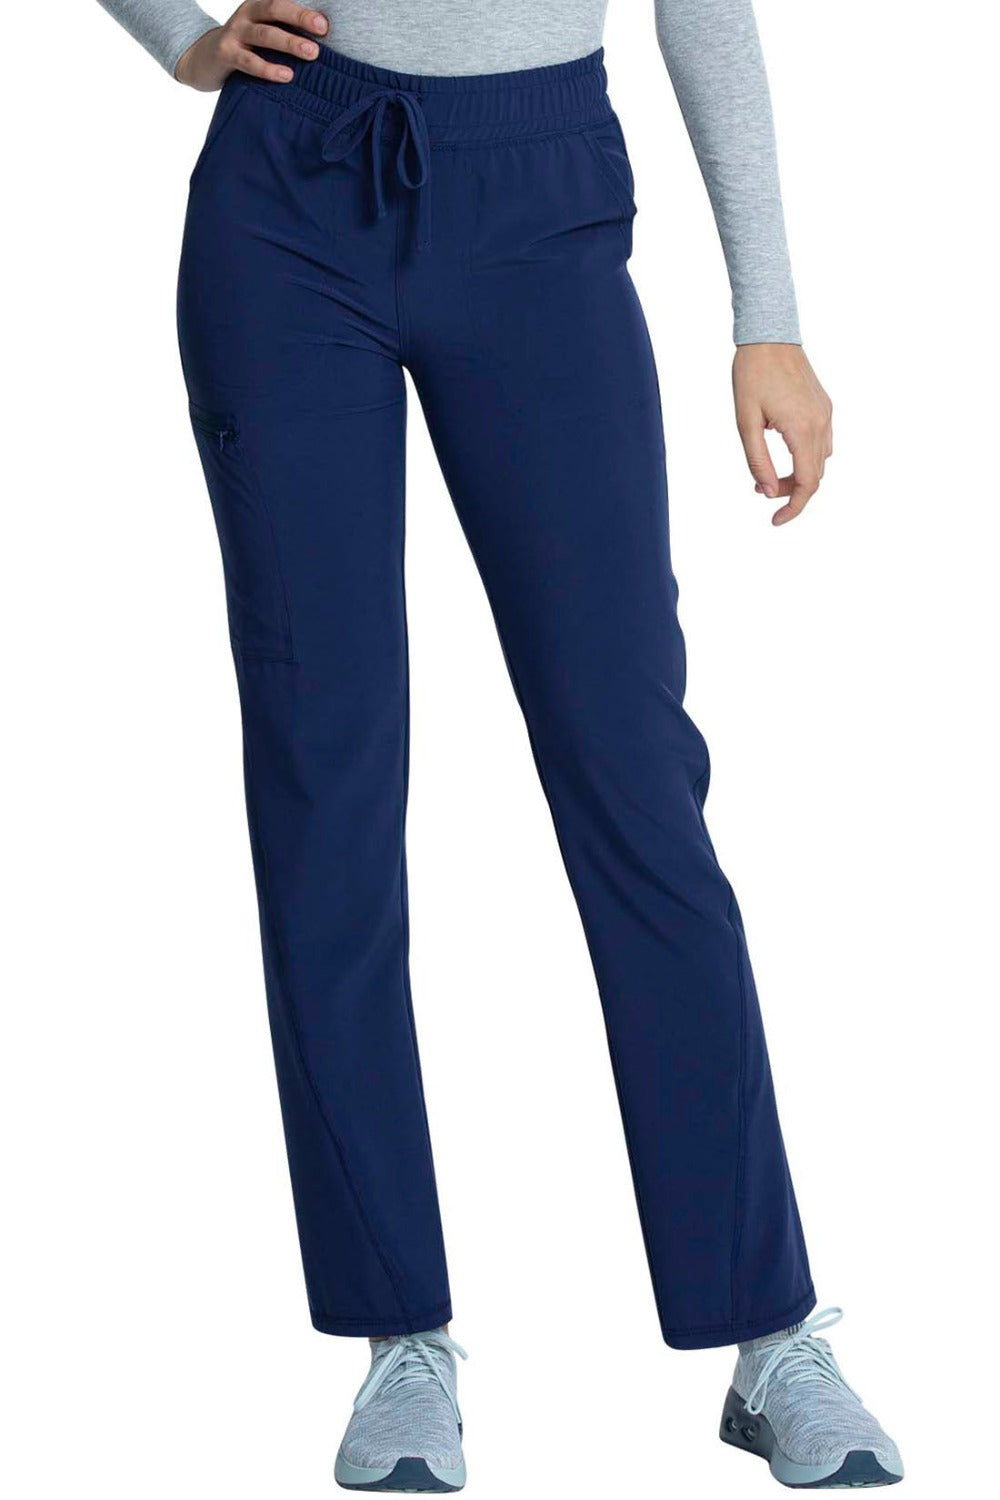 Cherokee Allura Petite Scrub Pant Mid Rise Tapered Leg Drawstring in Navy at Parker's Clothing and Shoes.